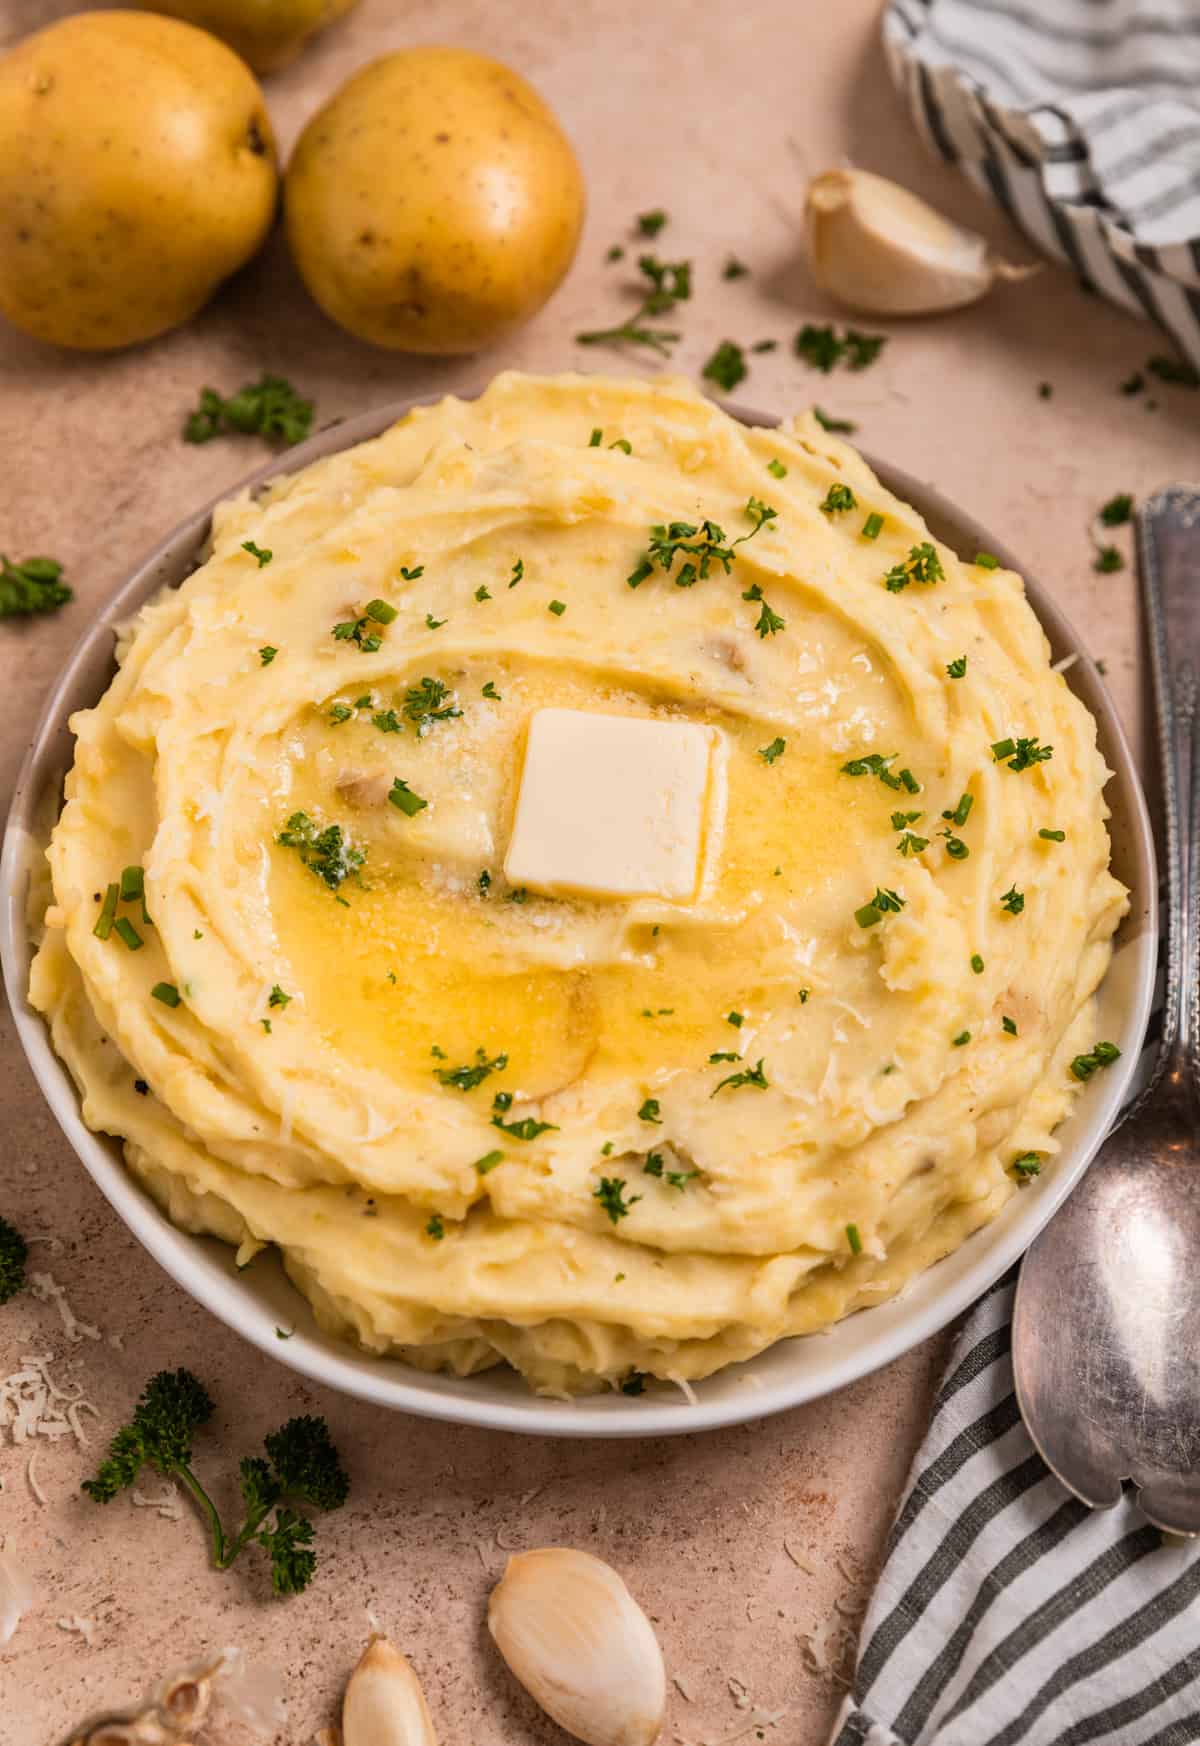 Garlic parmesan mashed potatoes in bowl surrounded by garlic cloves, parsley and other ingredients.